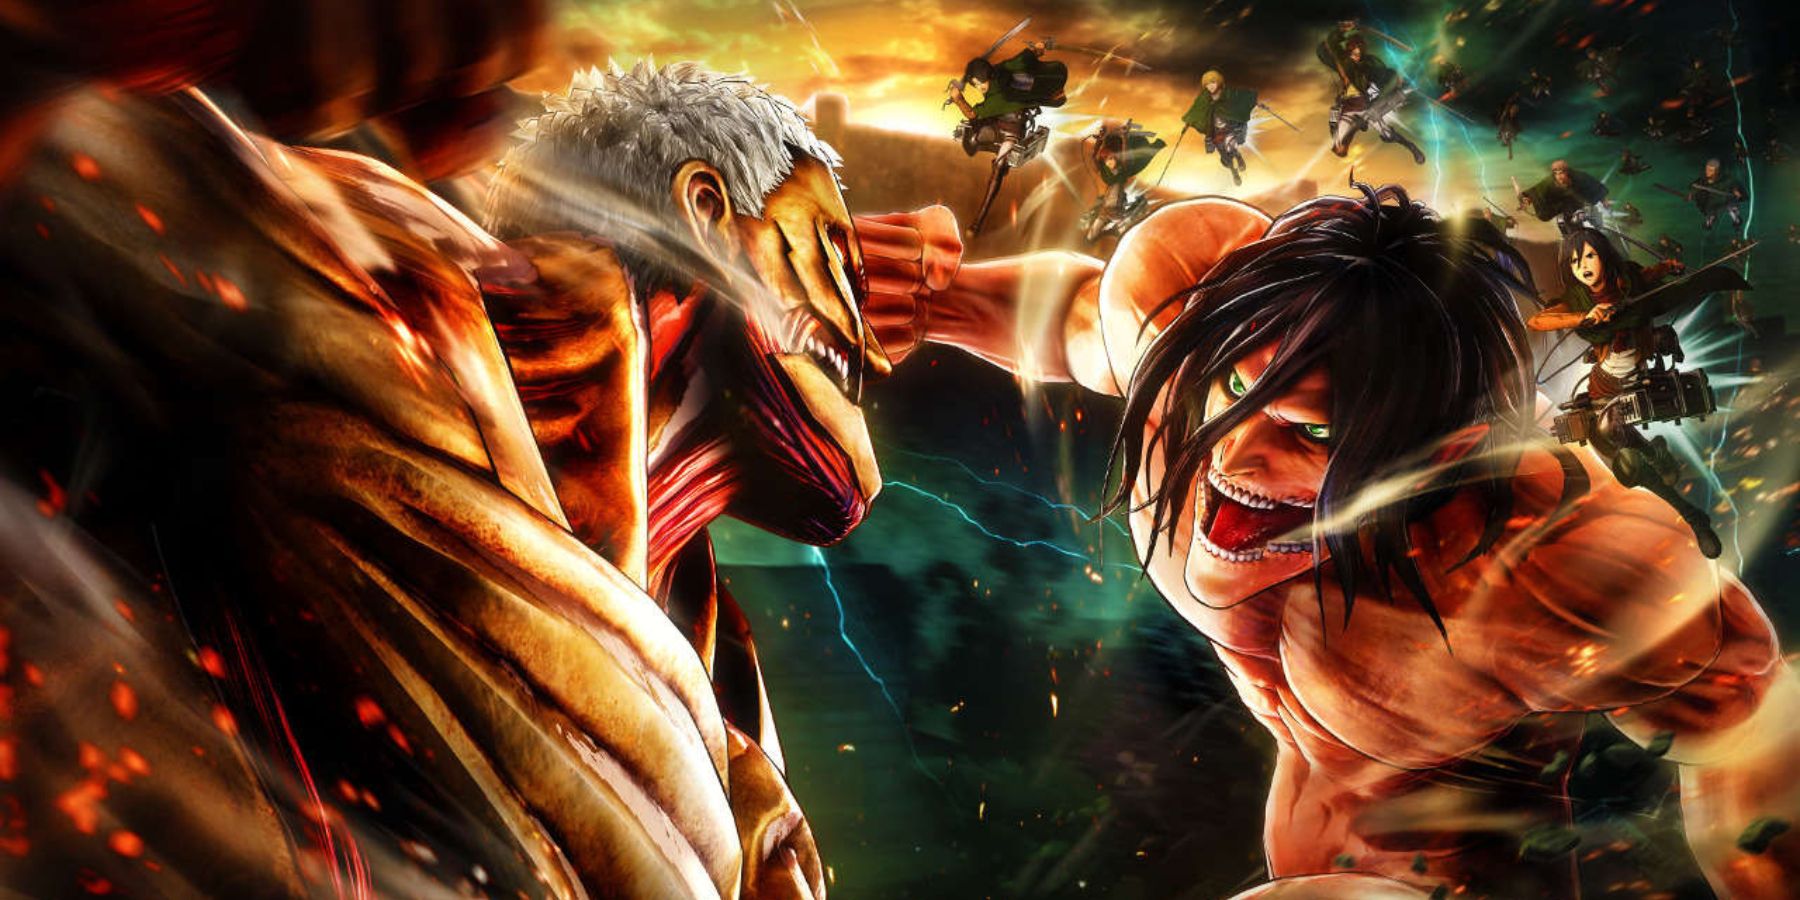 are the attack on titan video games worth playing?